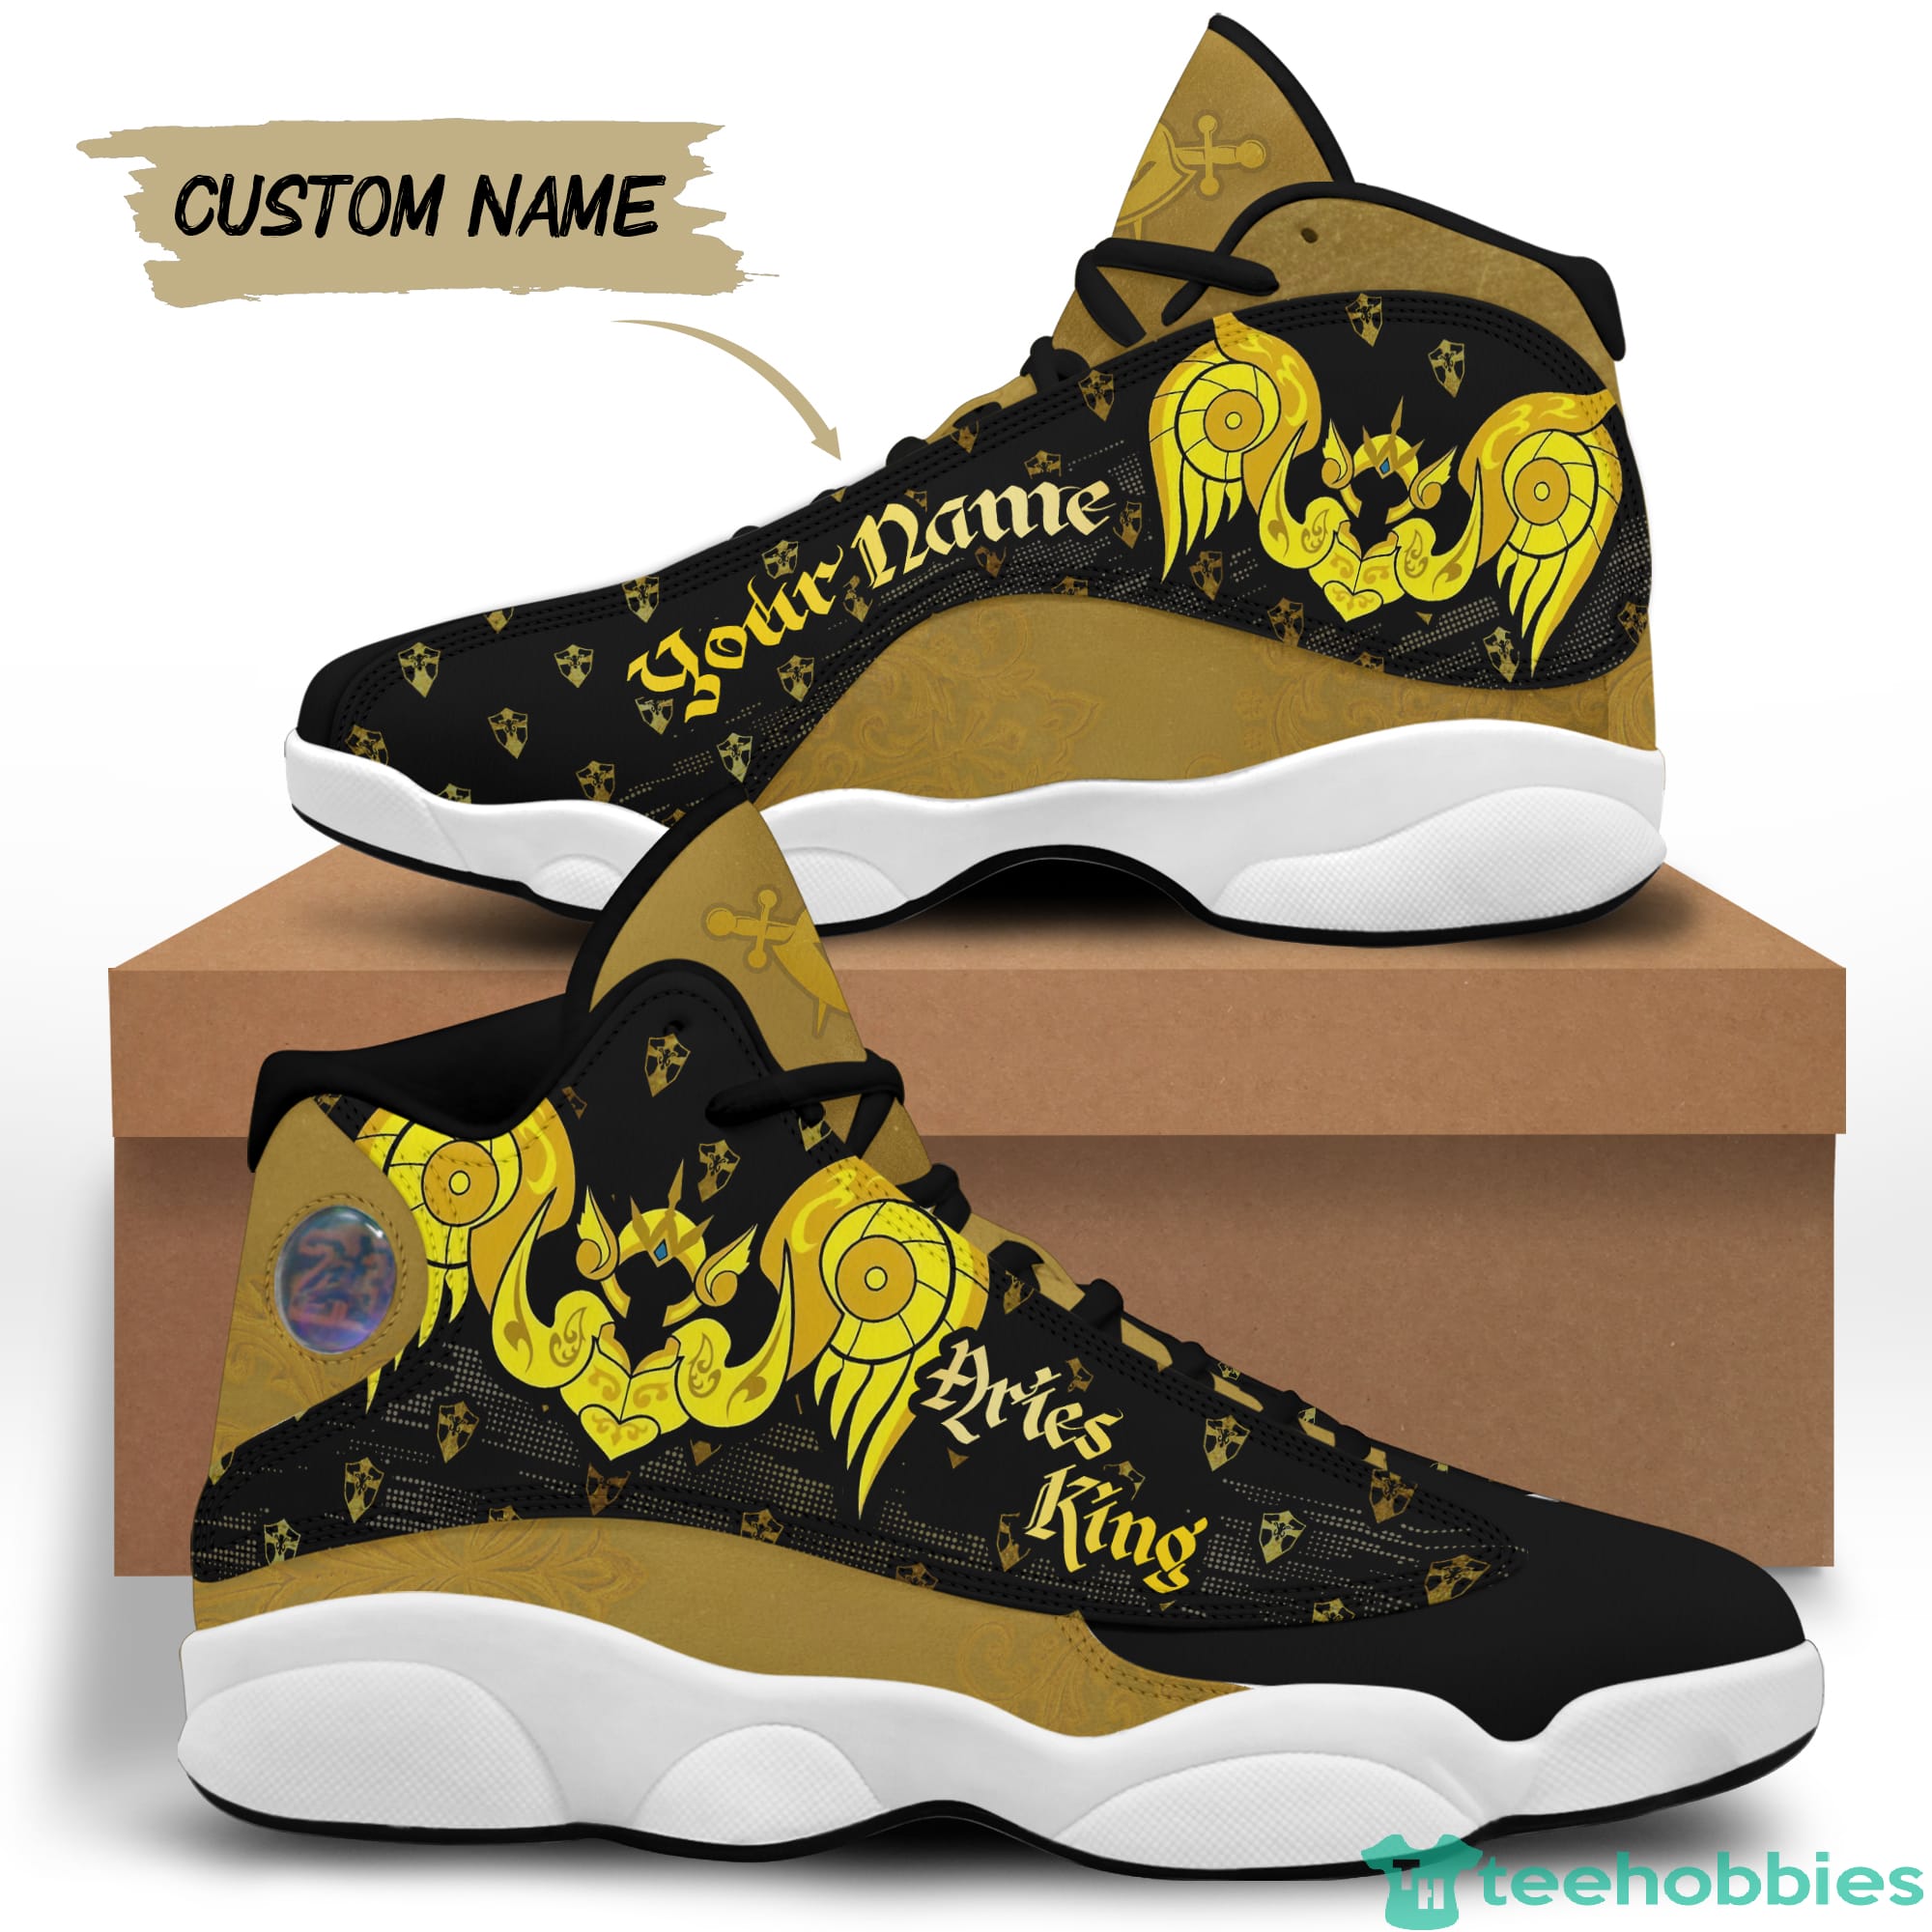 Aries Birthday Gift King Birthday Gift- Golden Personalized Name Air Jordan 13 Shoes